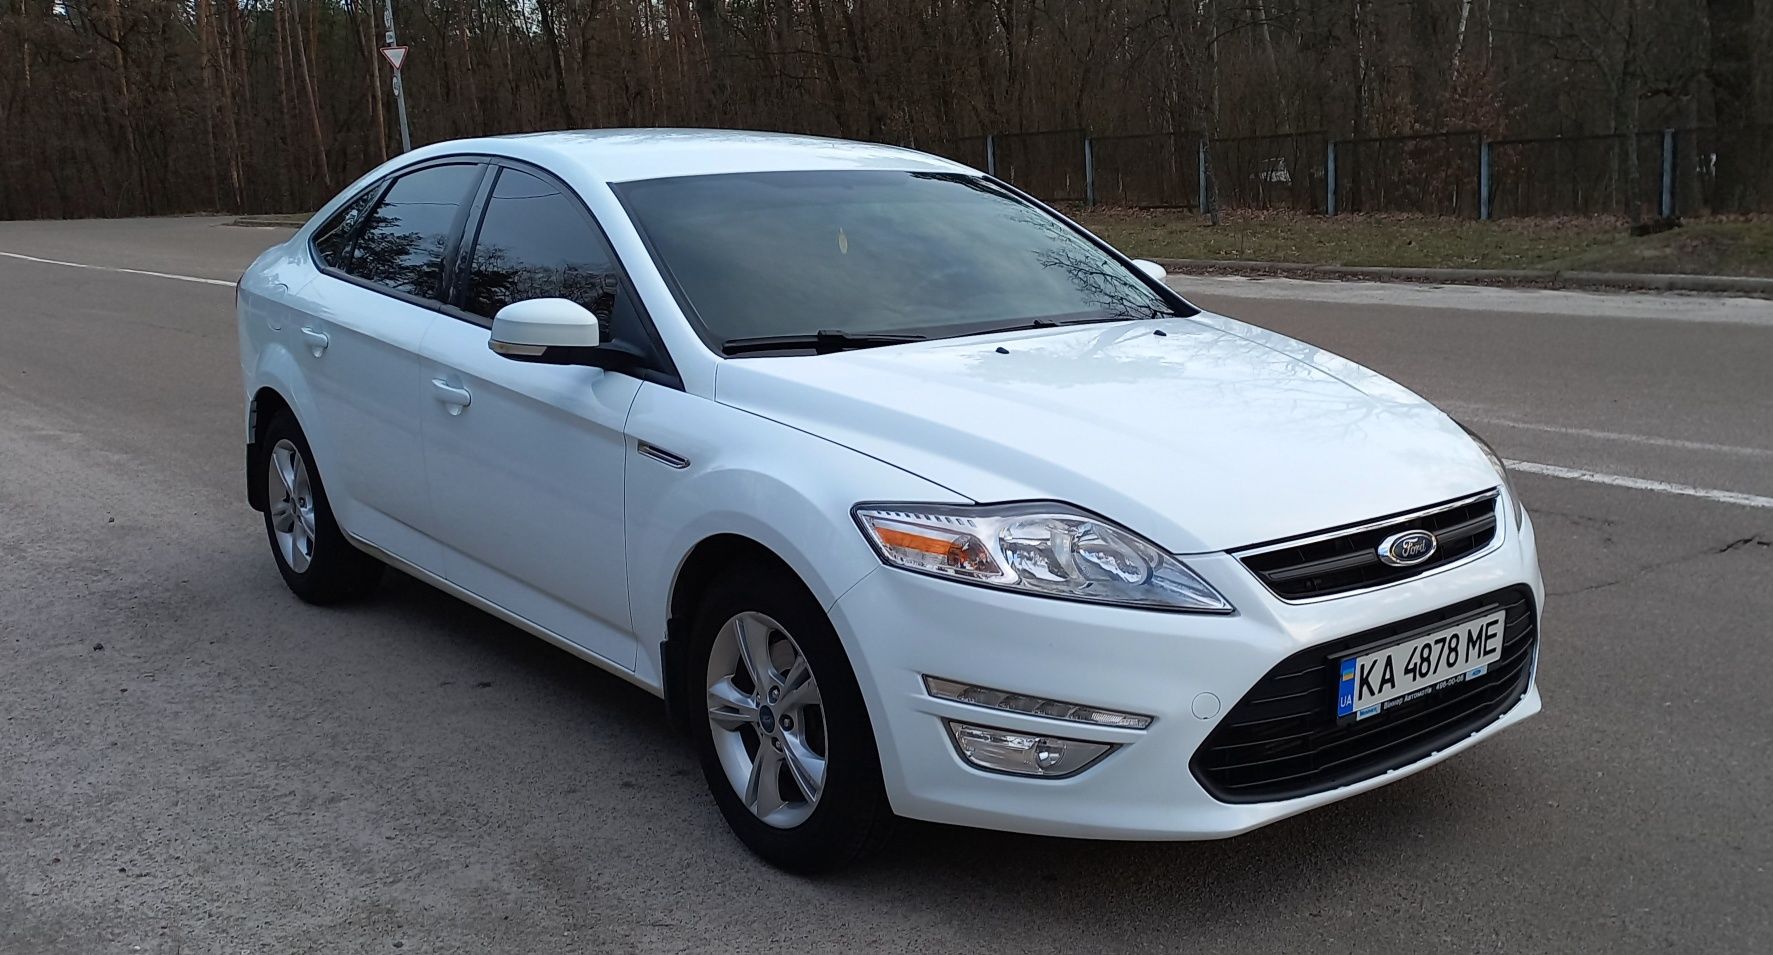 Ford Mondeo 4 2.0 tdci